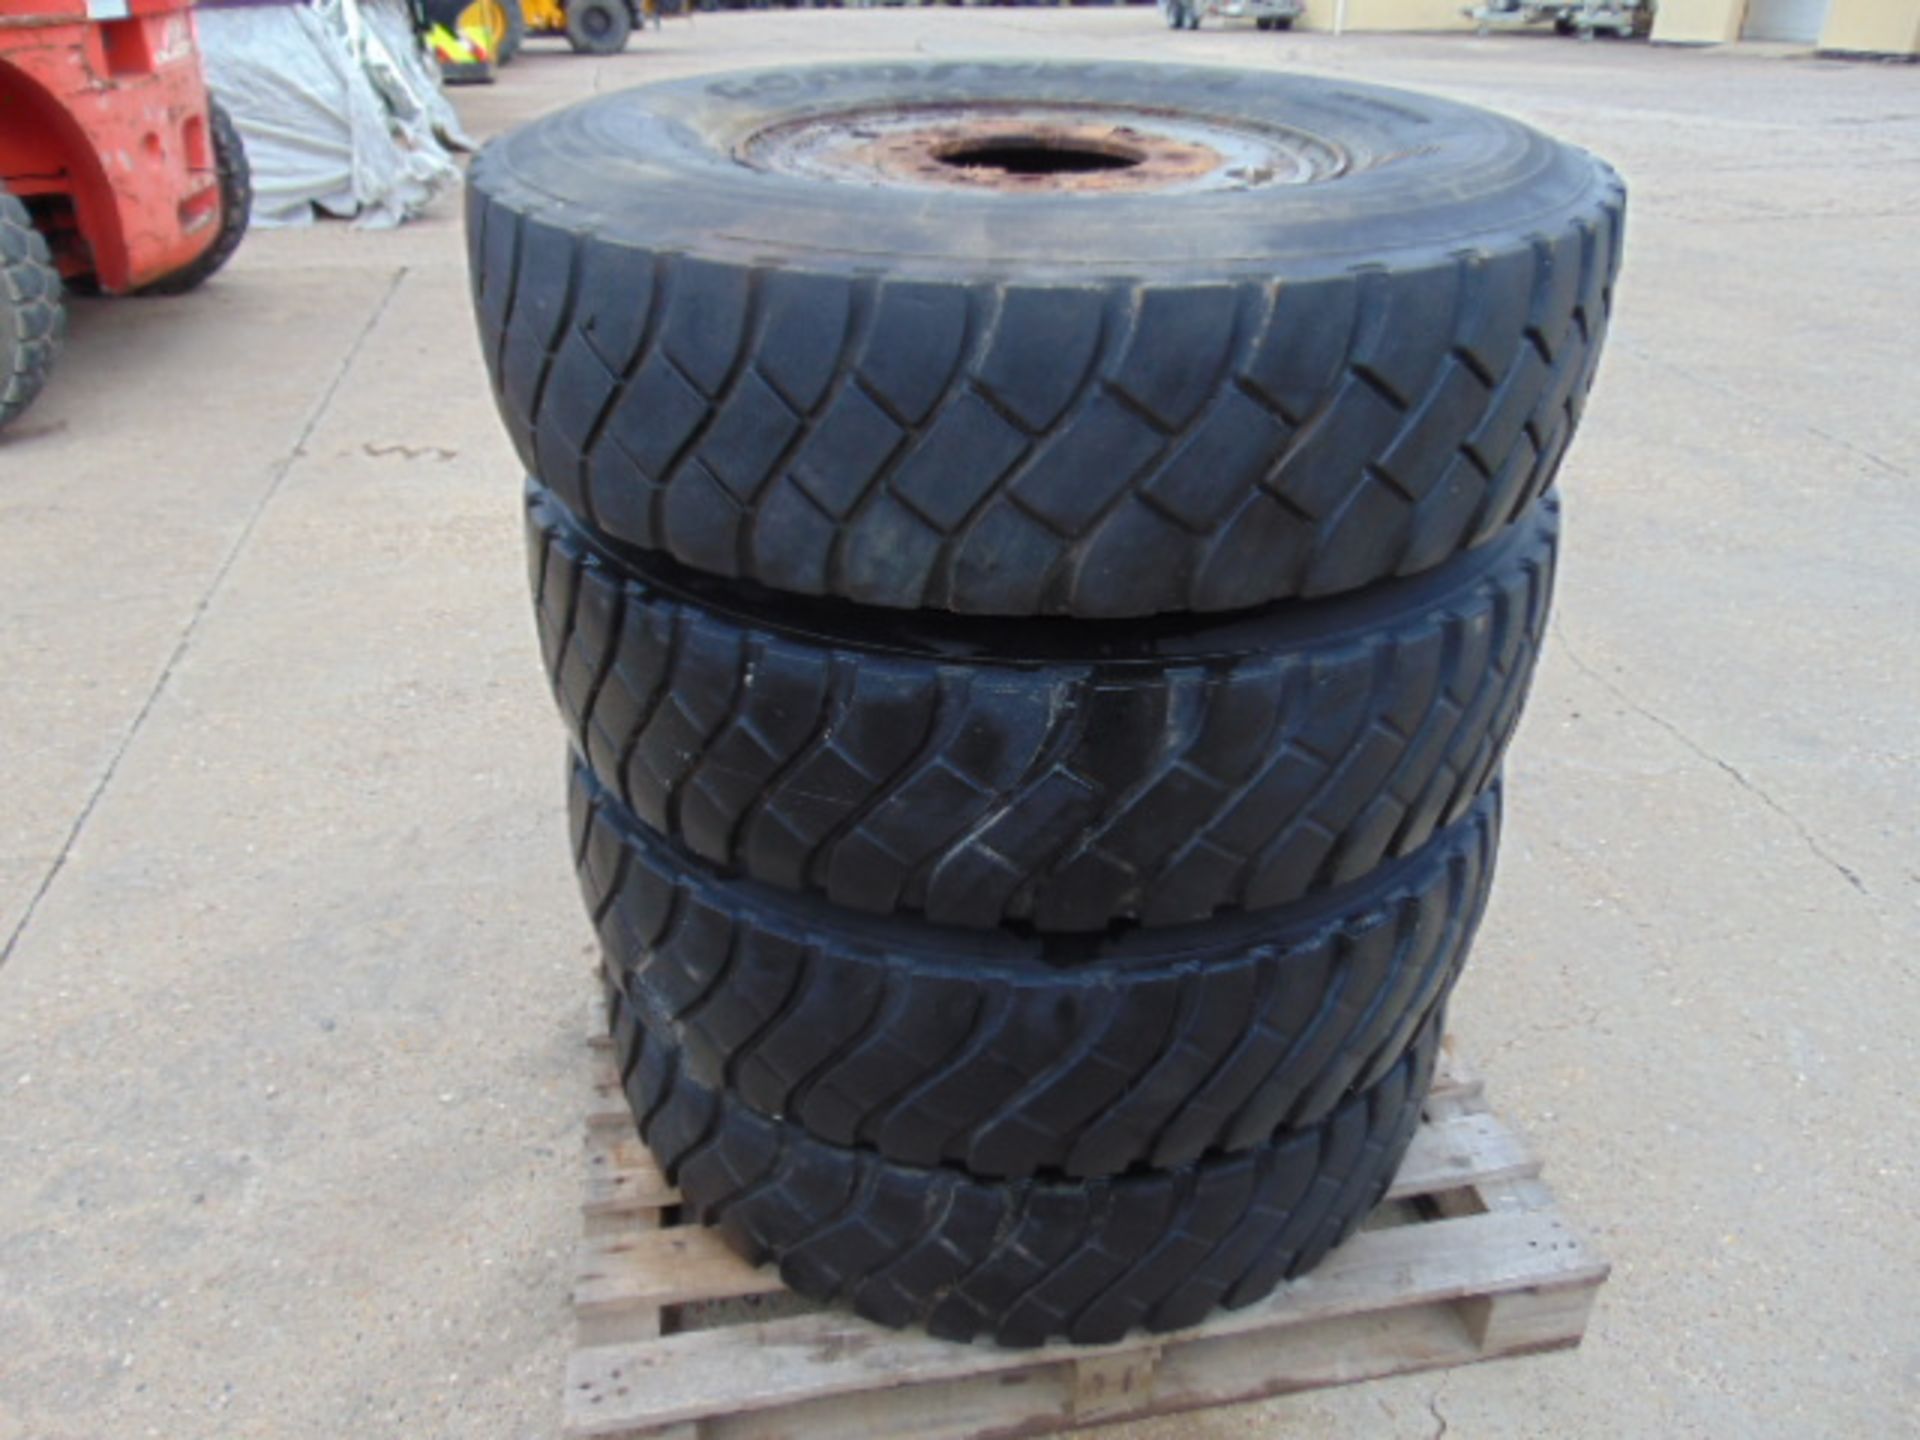 4 x Goodyear 12.00 20 Tyres complete with 8 stud rims